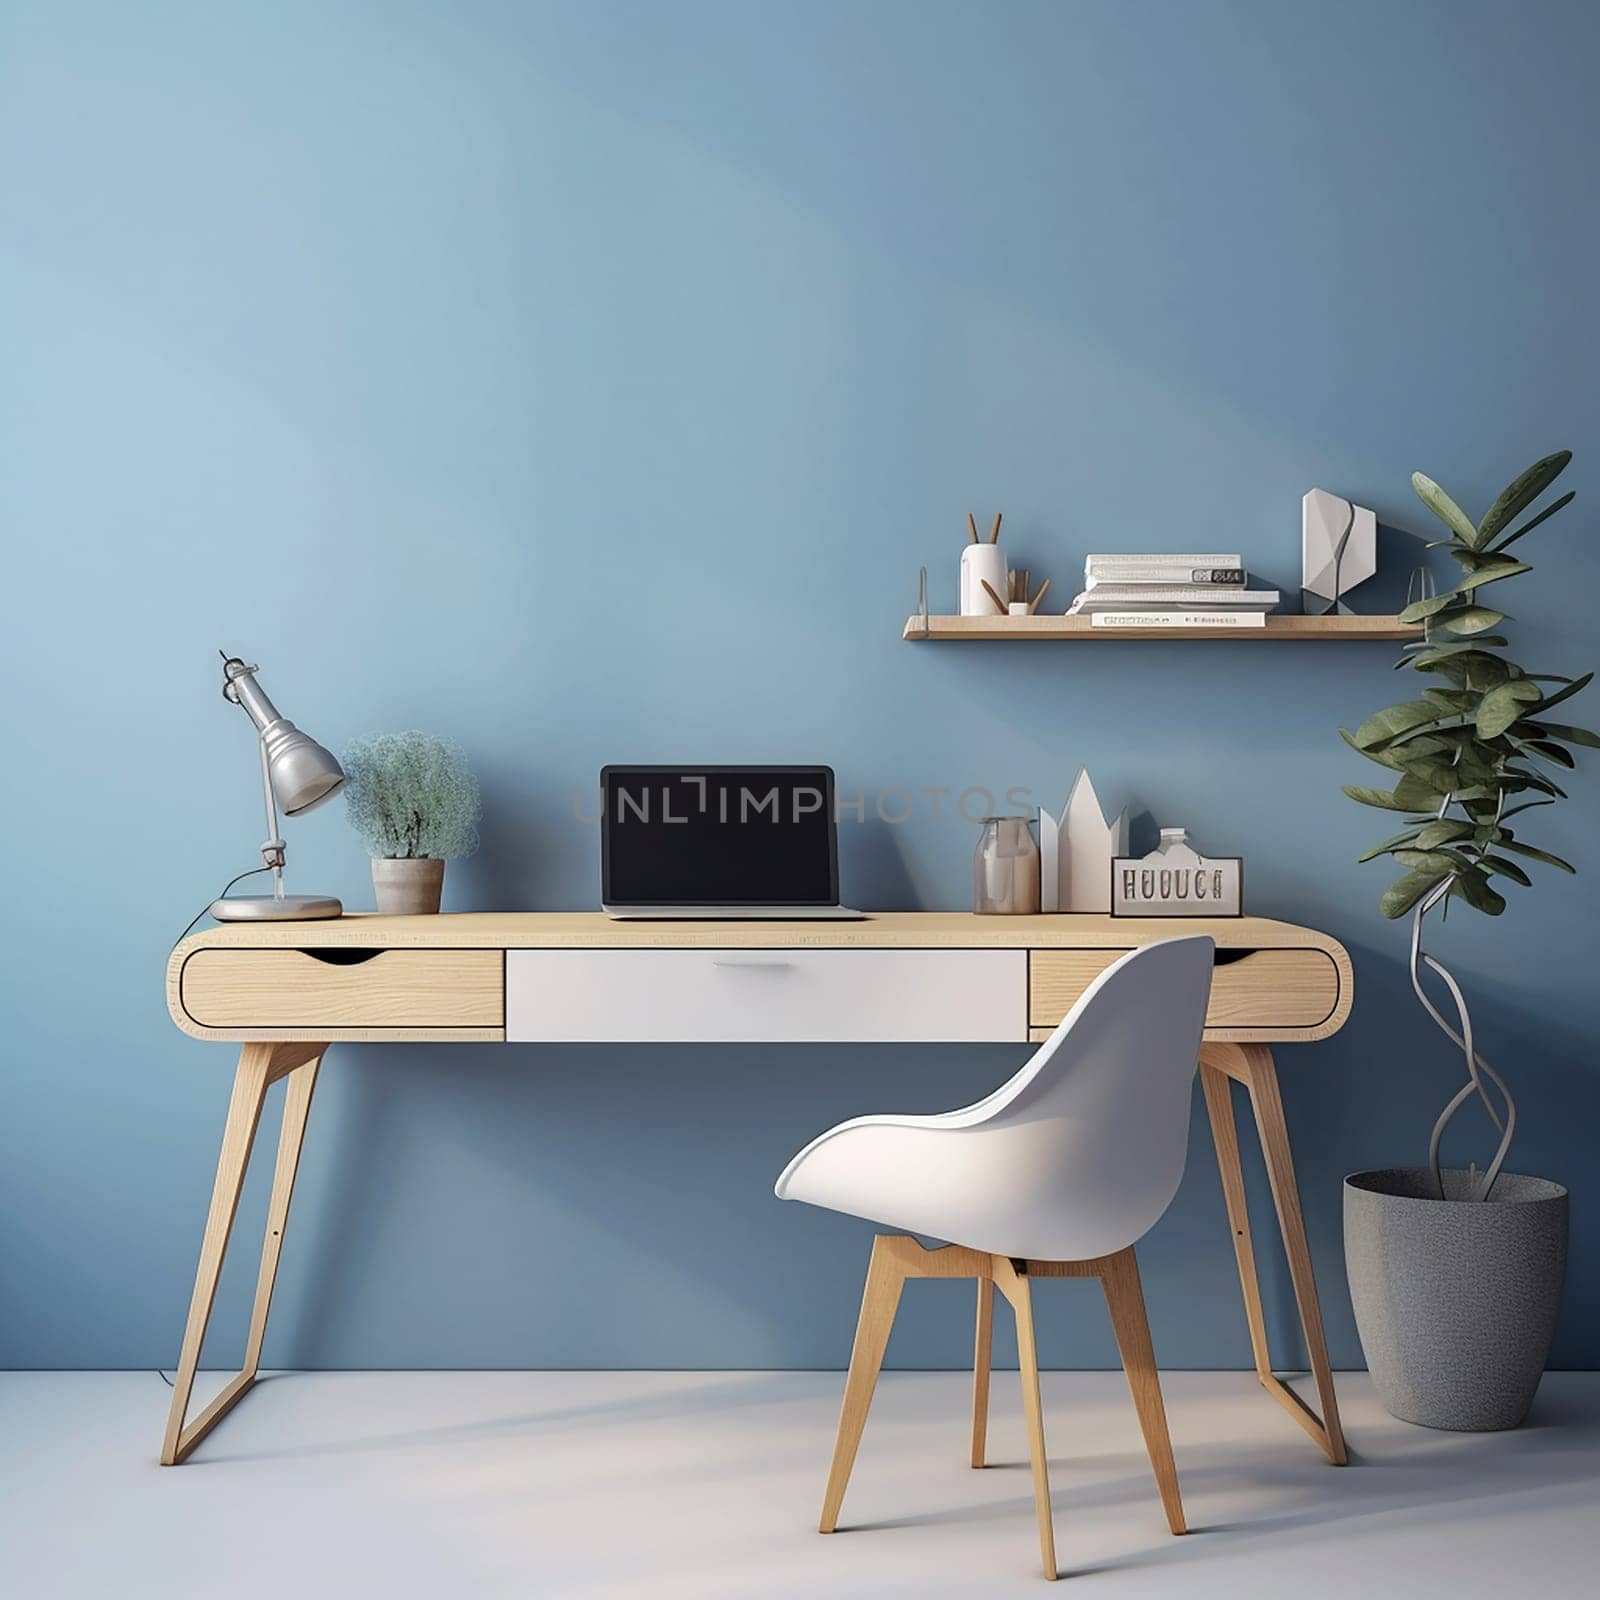 A smart working station with a desk and some potted plant by Hype2art